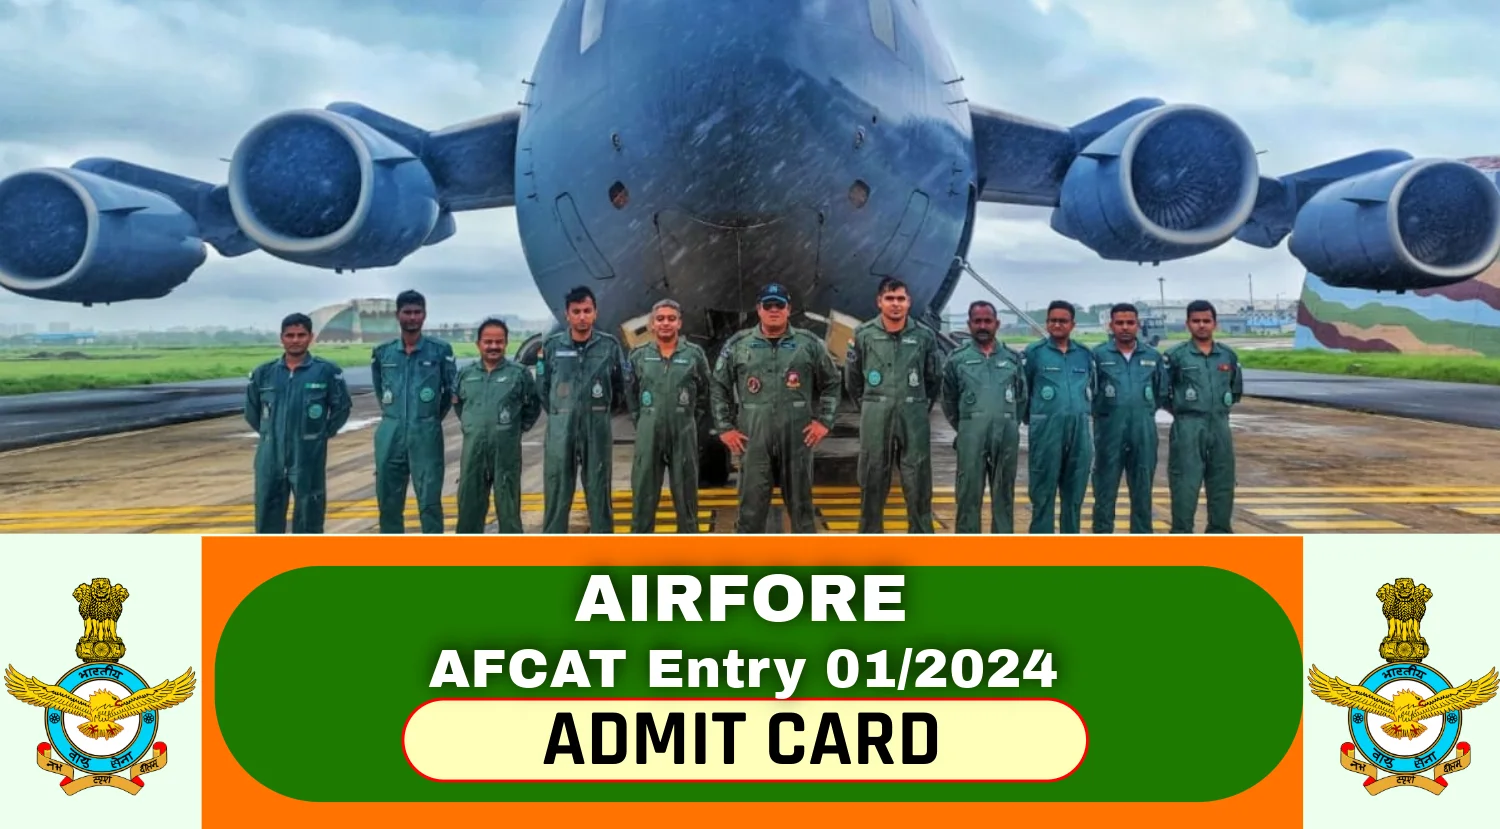 Air Force Admit Card 2024 Out, Indian Airforce AFCAT 012024 Entry Hall Ticket Now